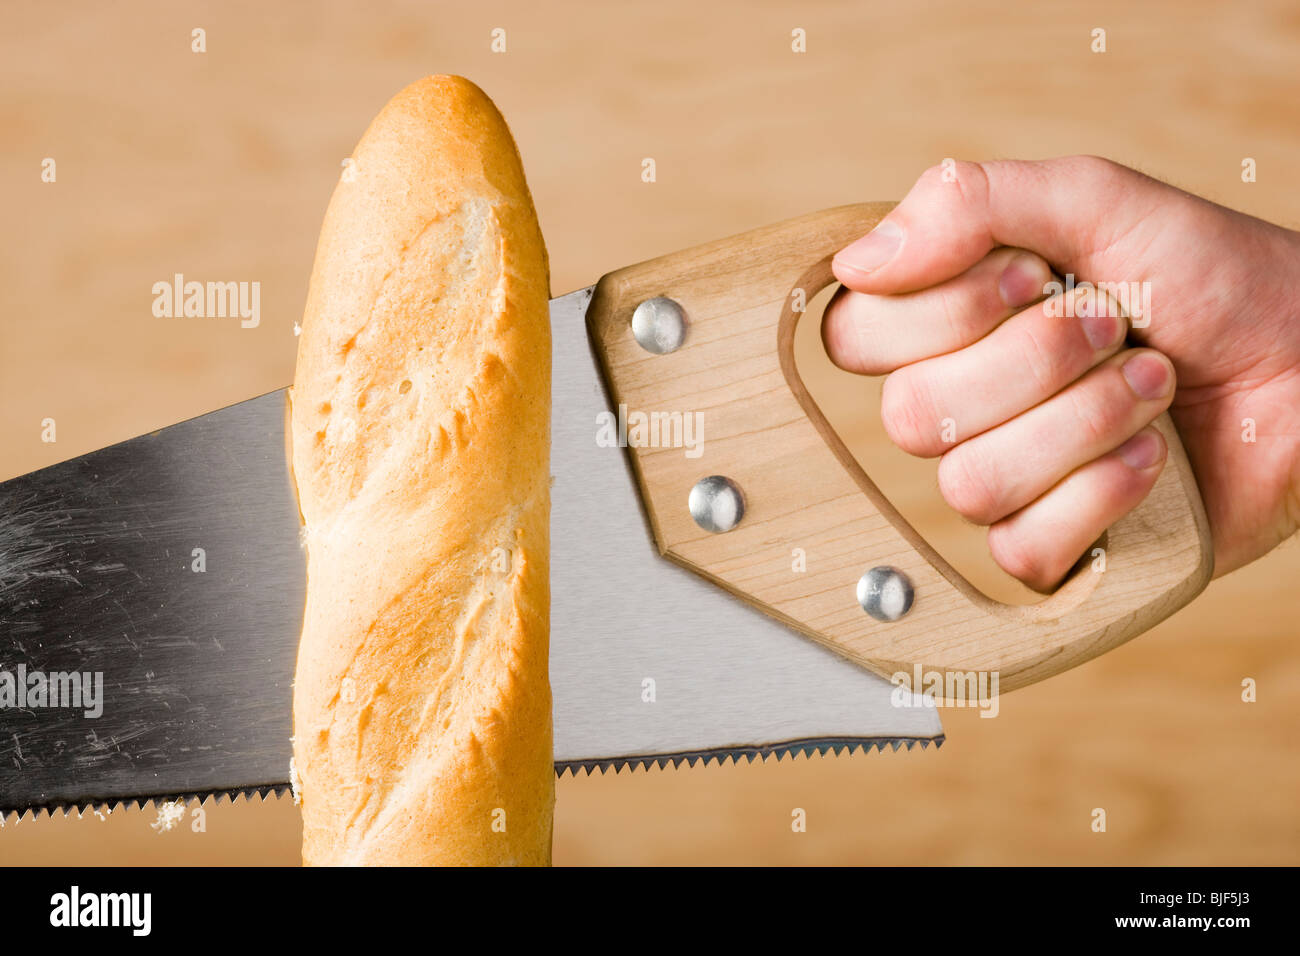 hand sawing a loaf of french bread Stock Photo